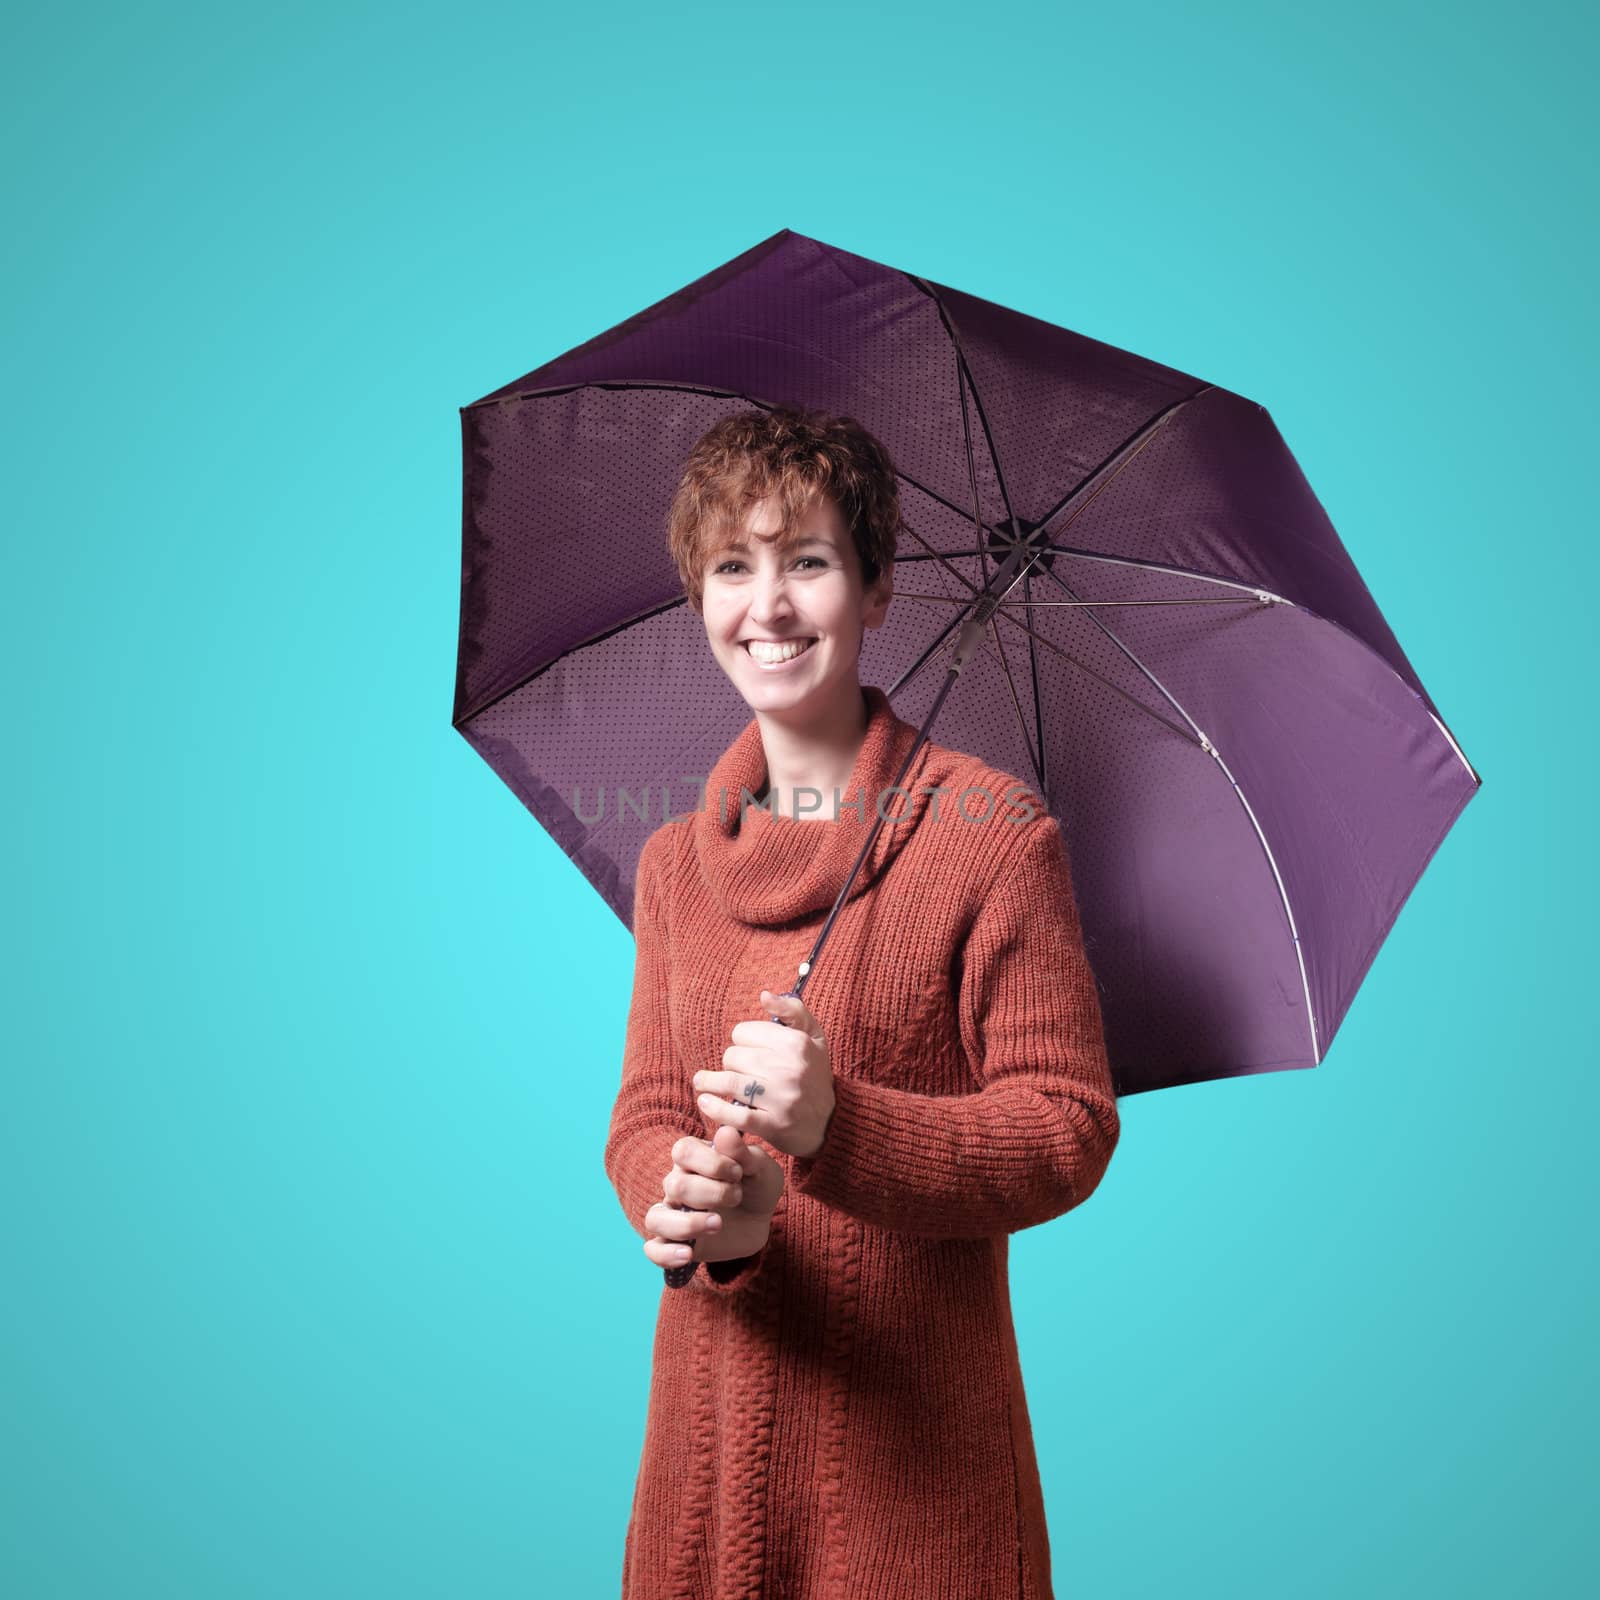 beautiful woman with sweater and umbrella on blue background